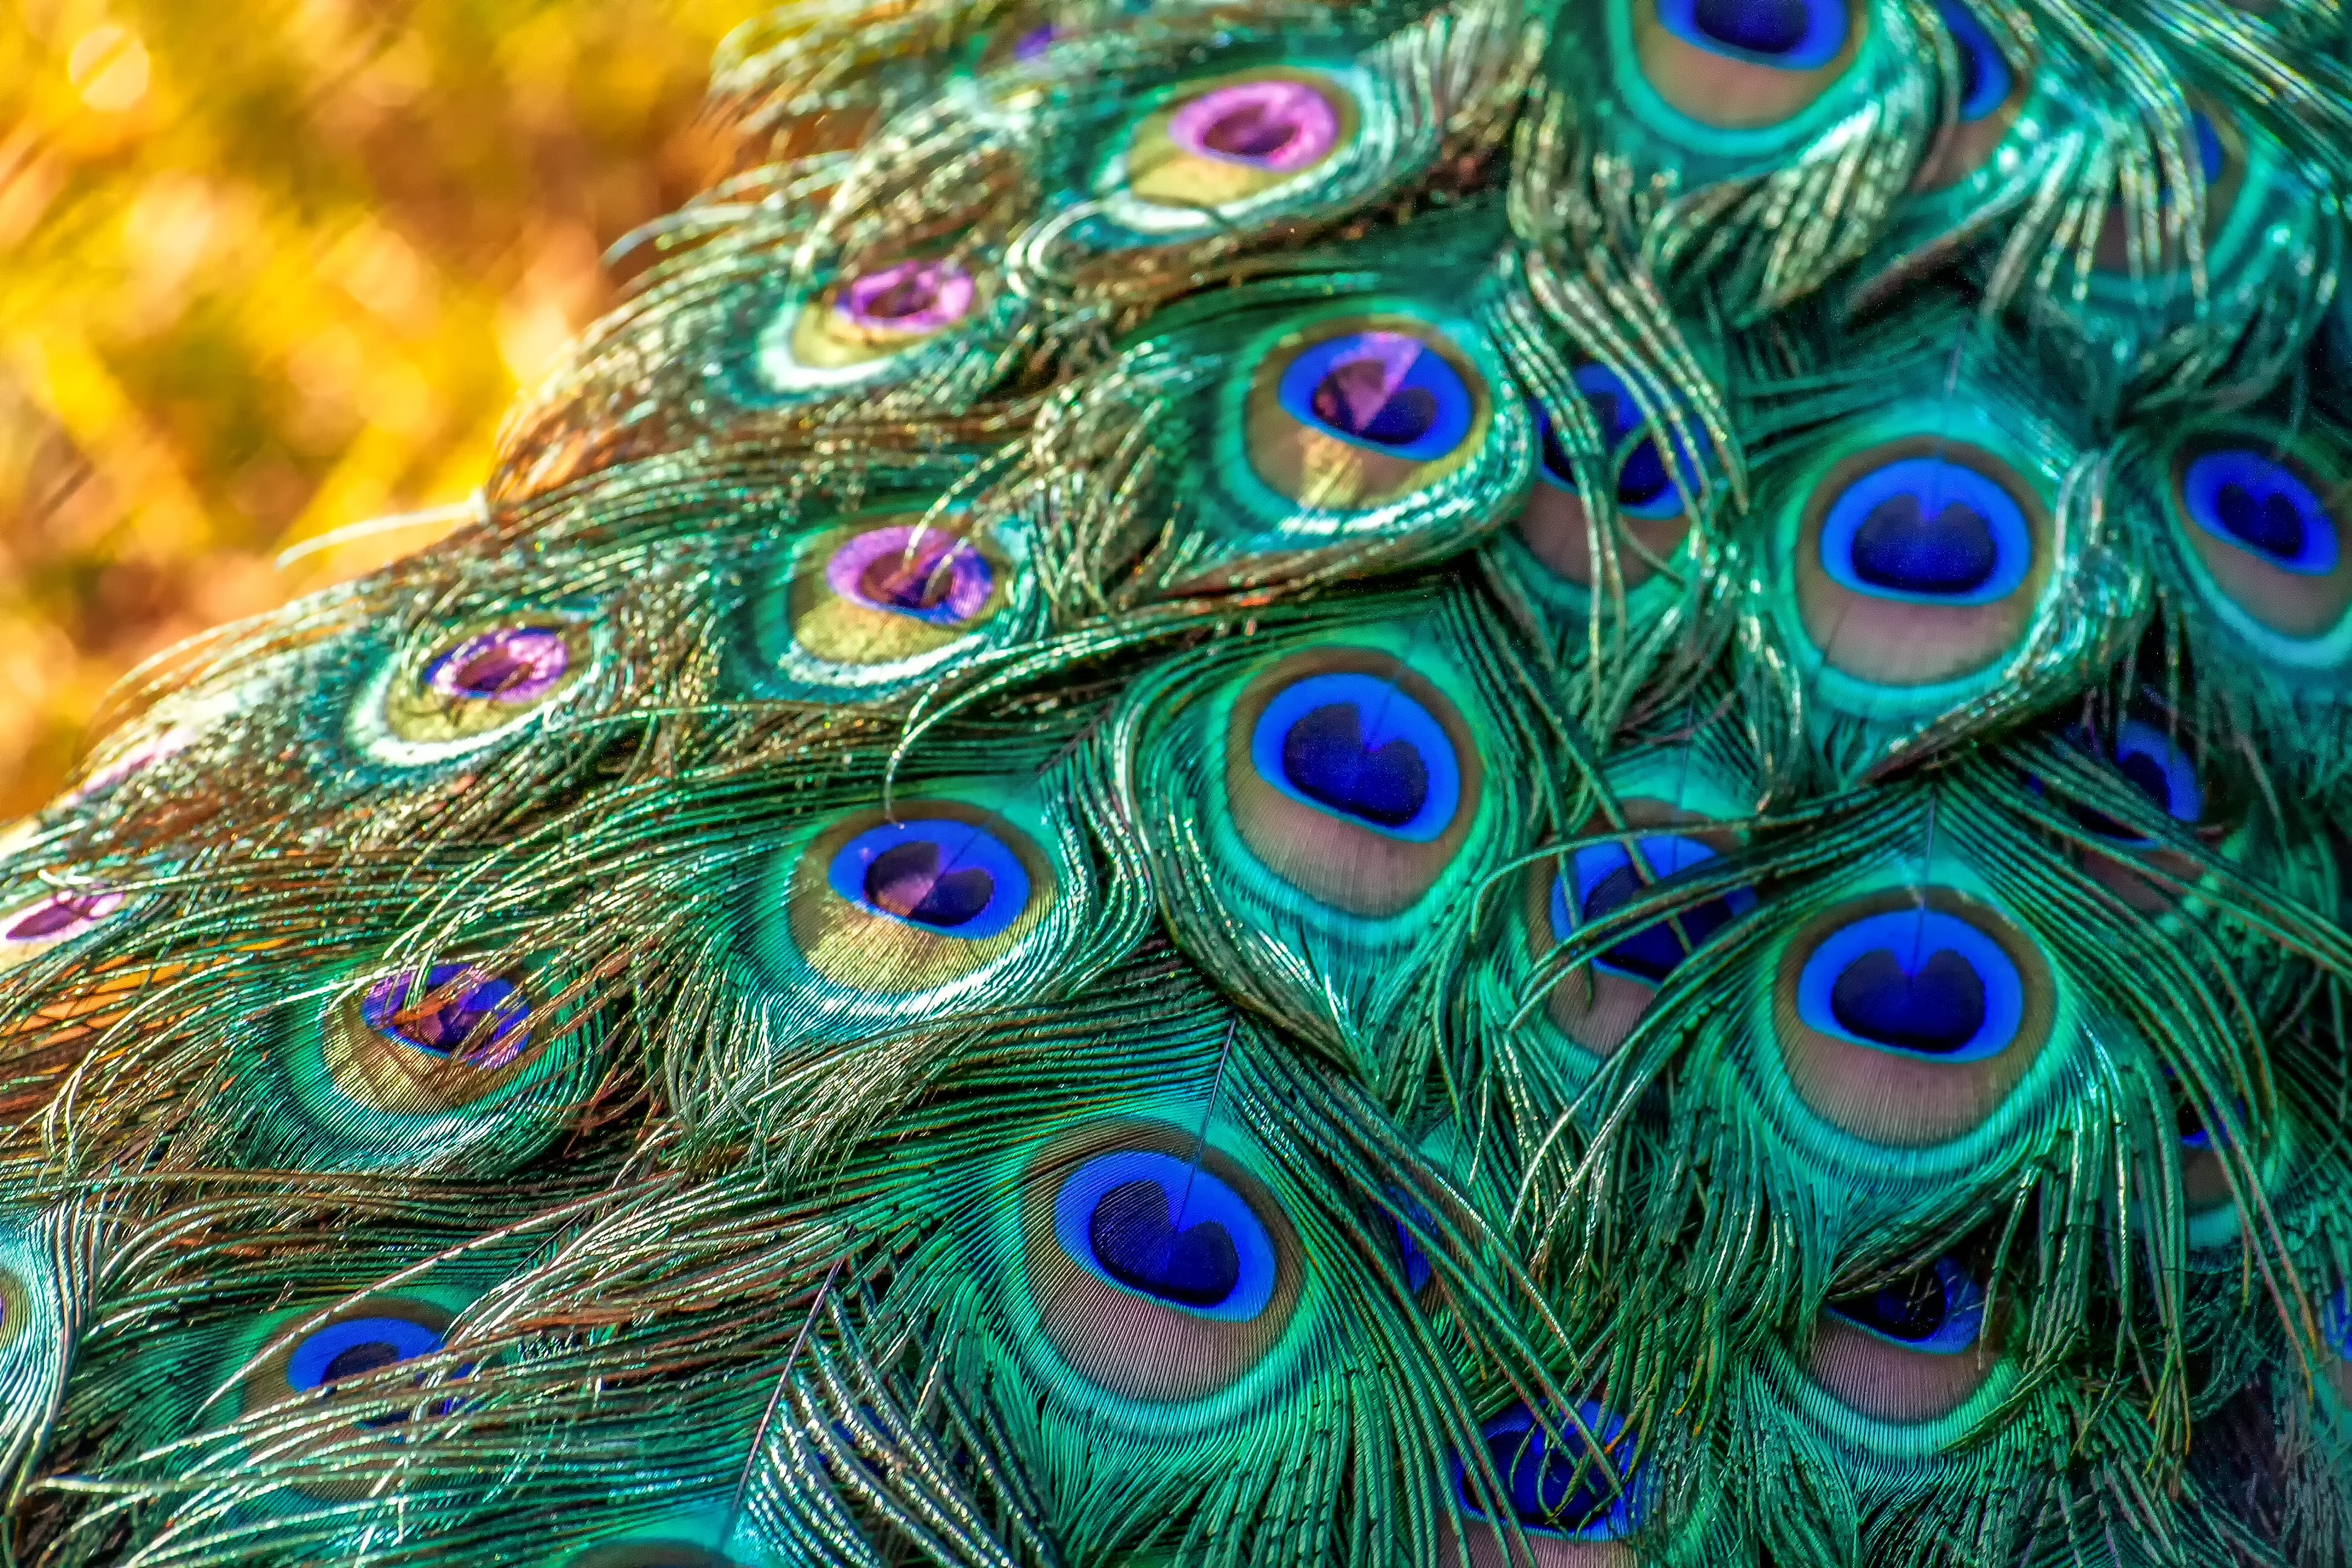 green-and-blue peacock feathers, nature, animal, iridescent, spring dress